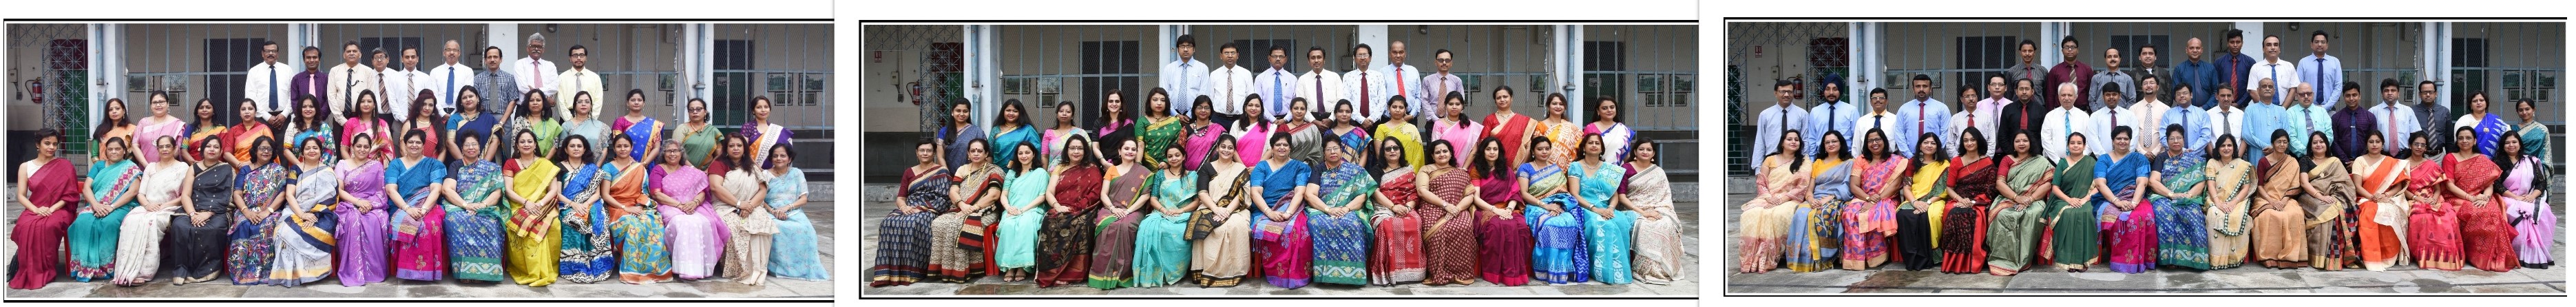 OUR FACULTY